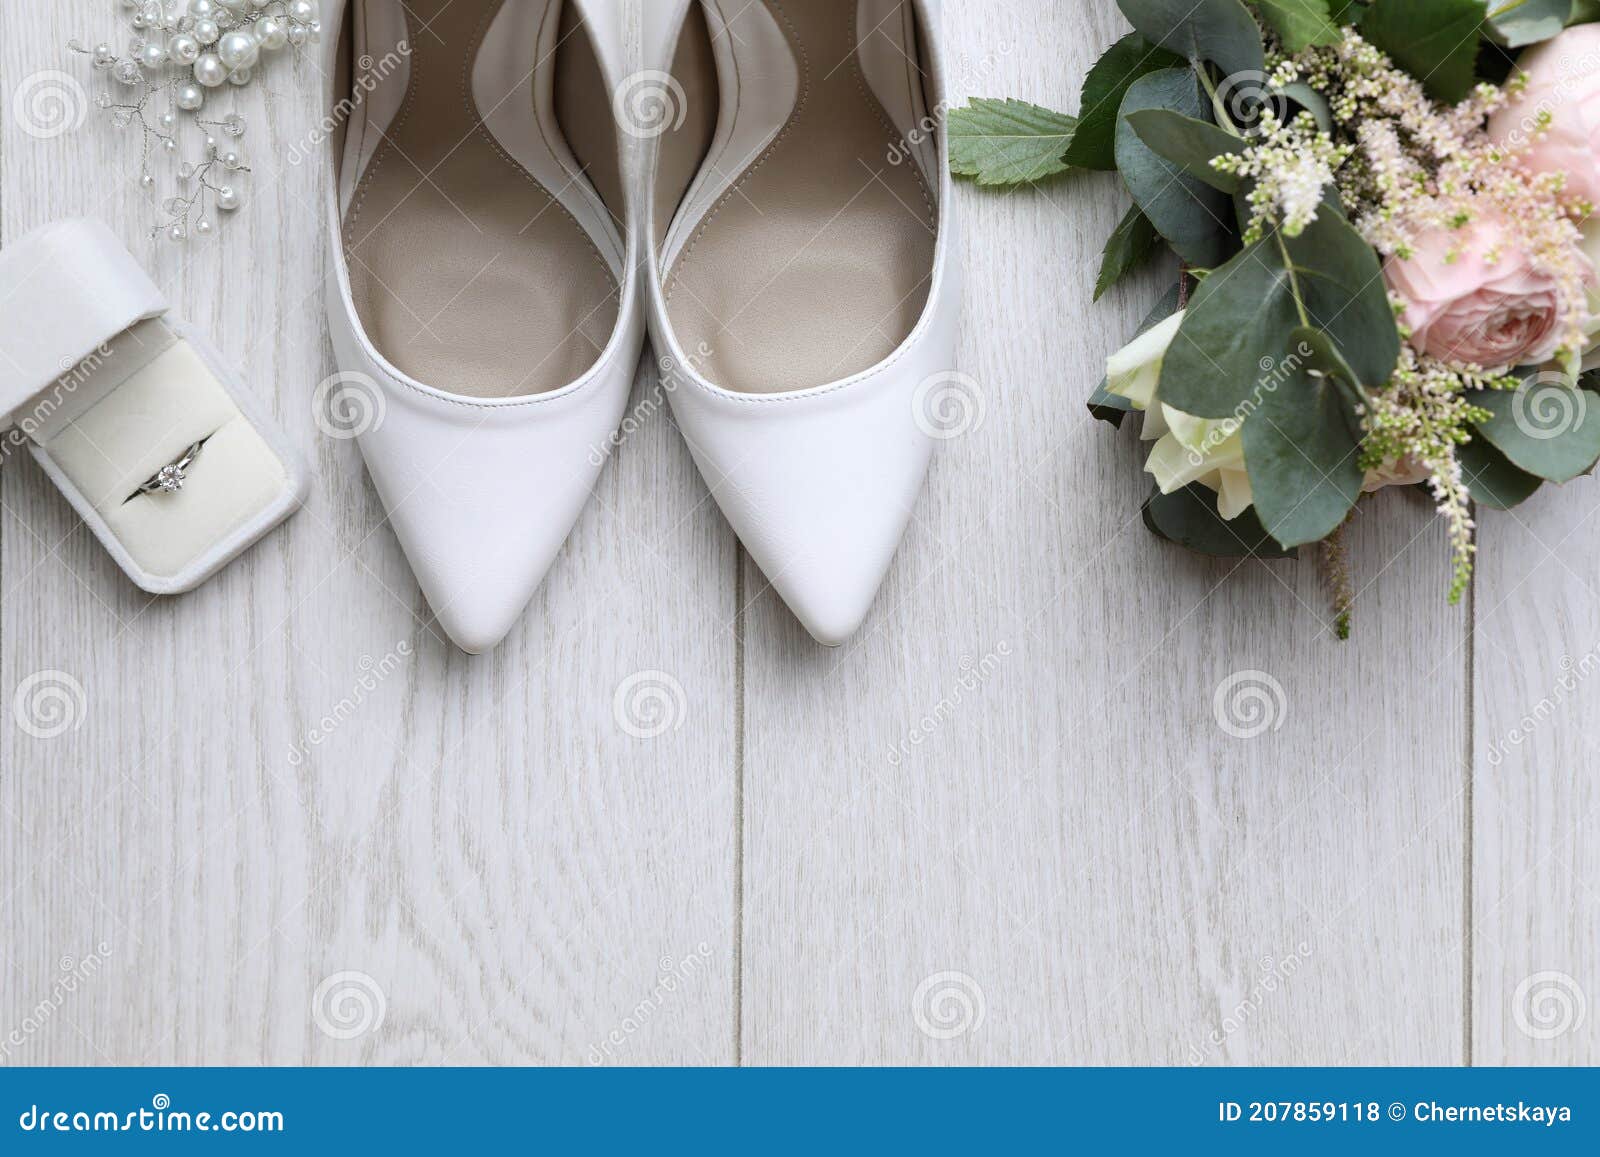 Flat Lay Composition with Wedding High Heel Shoes on White Wooden Floor ...